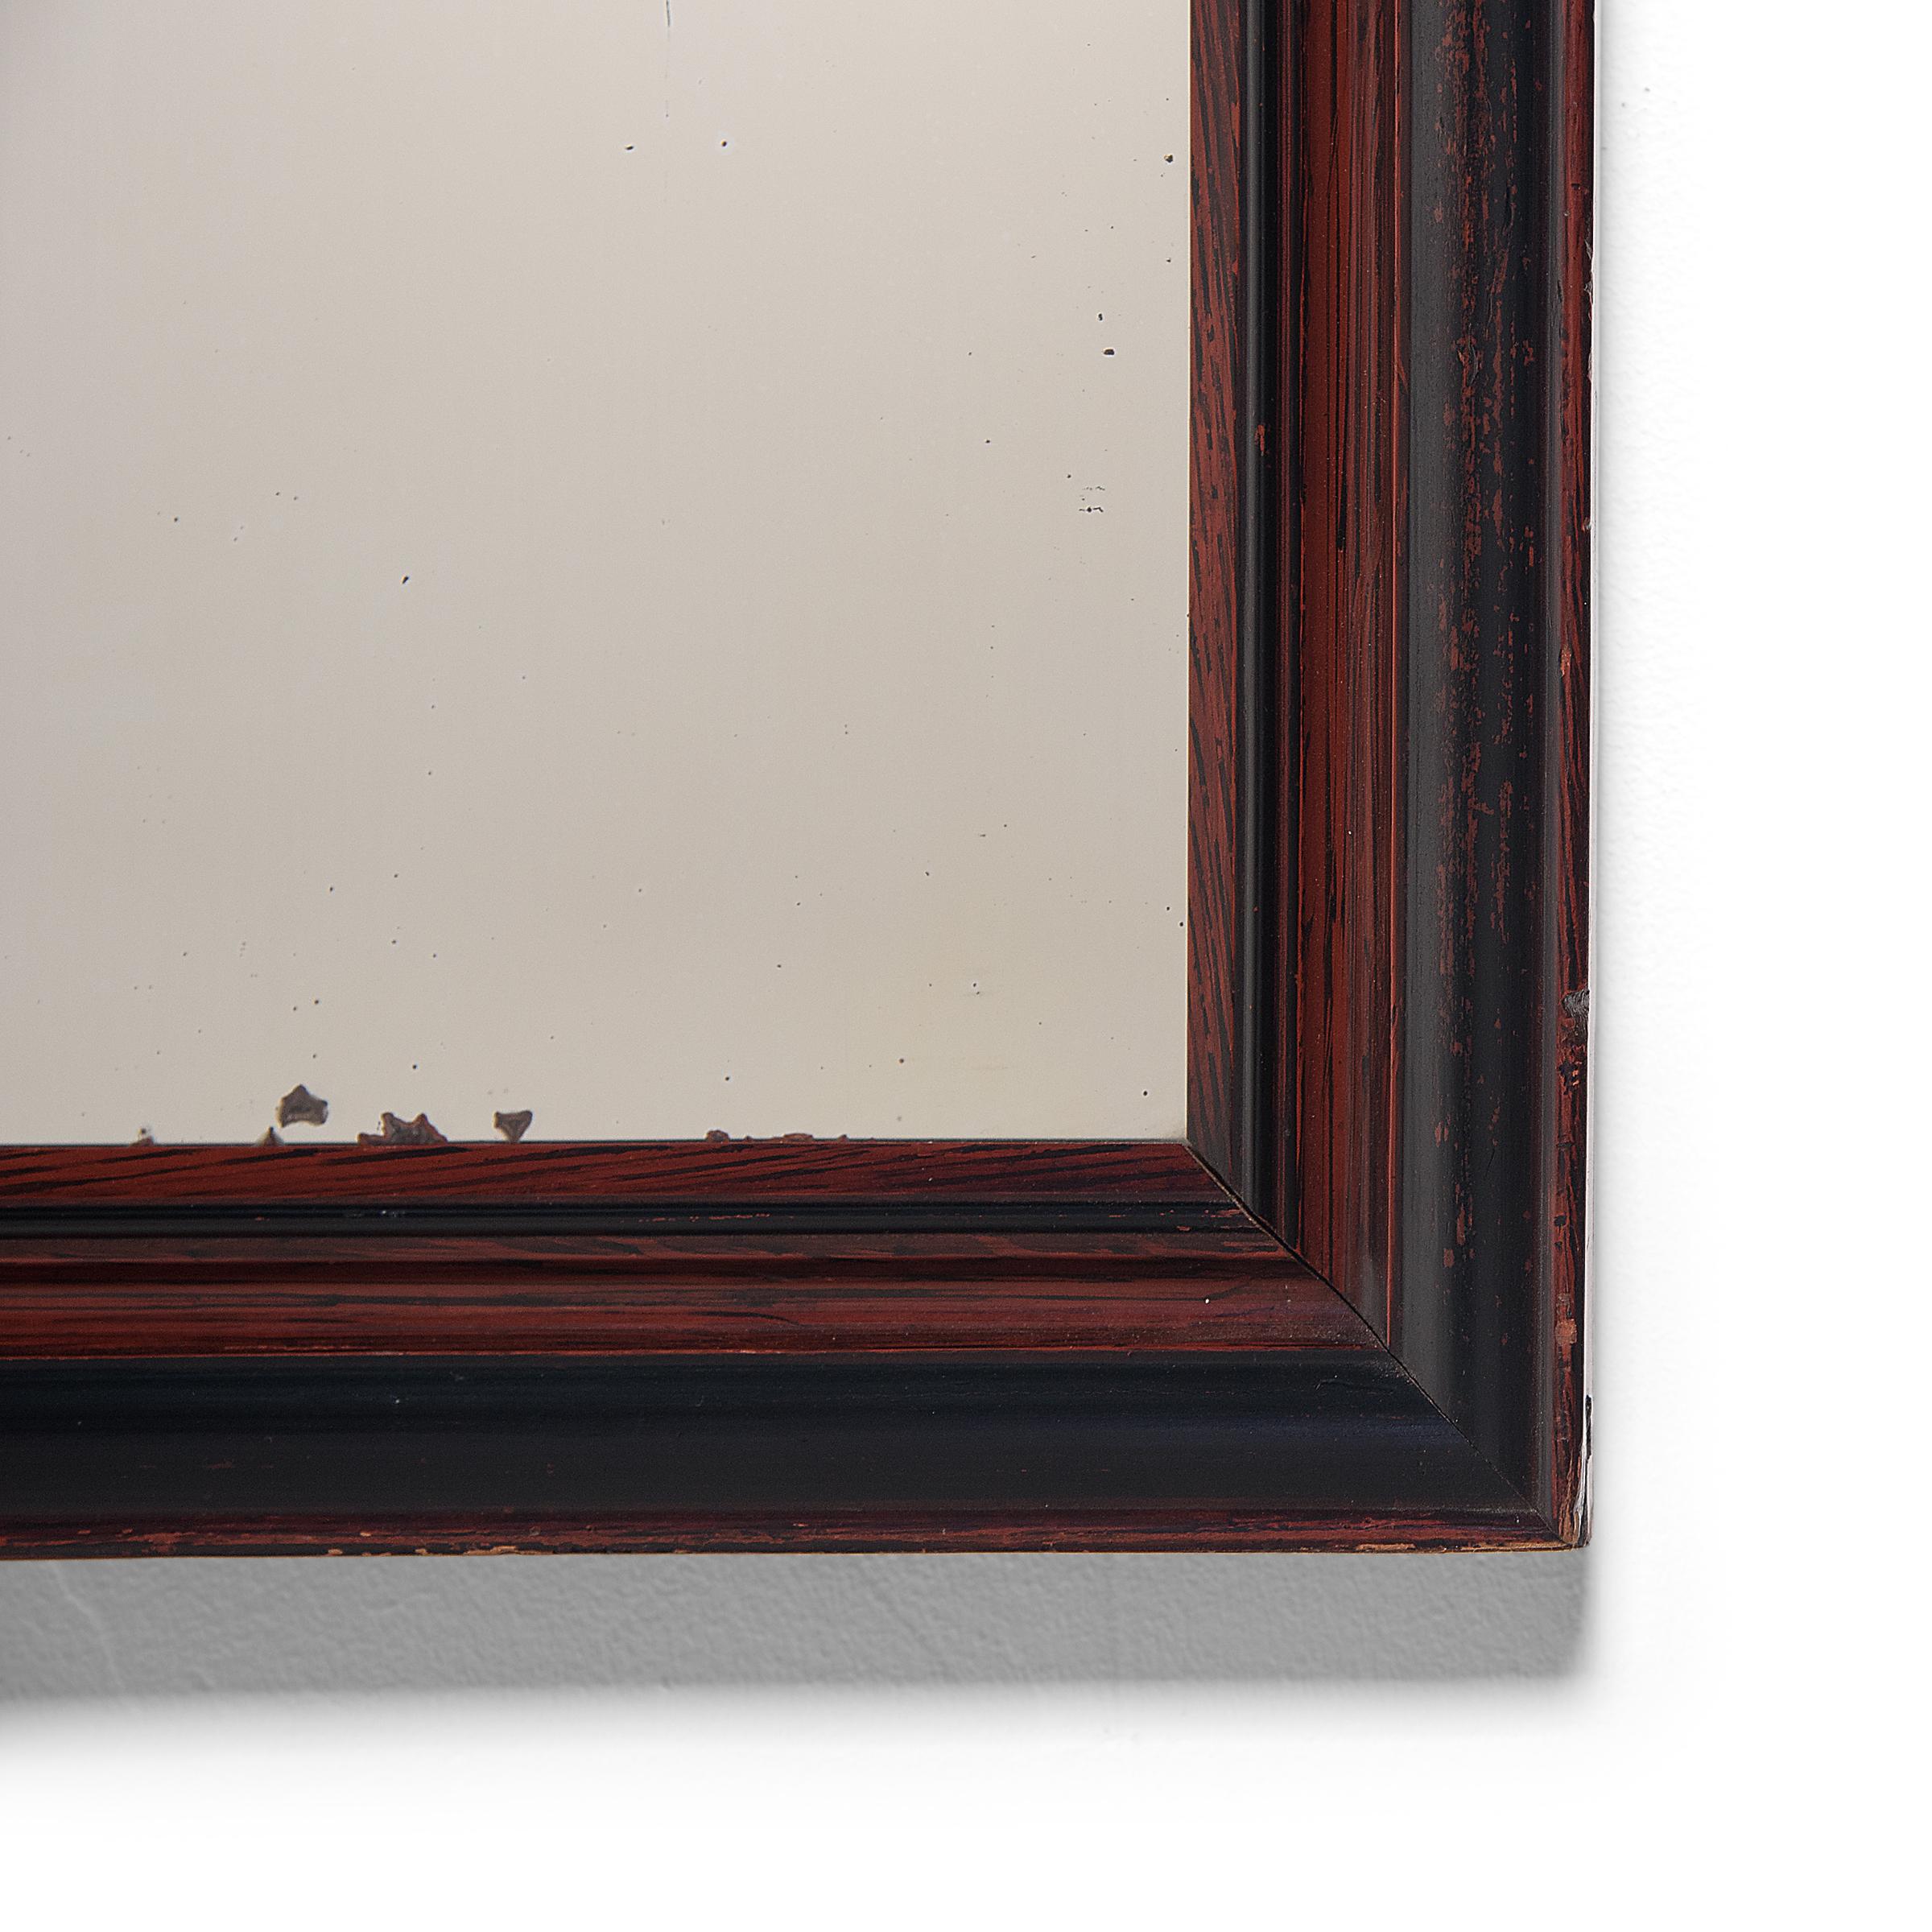 This charming wall mirror was crafted in China's Guangdong province and dates to the early 20th century. The rectangular frame is colored with finely brushed red and black lacquer, for a rustic finish. The mitered frame encloses the original mirror,